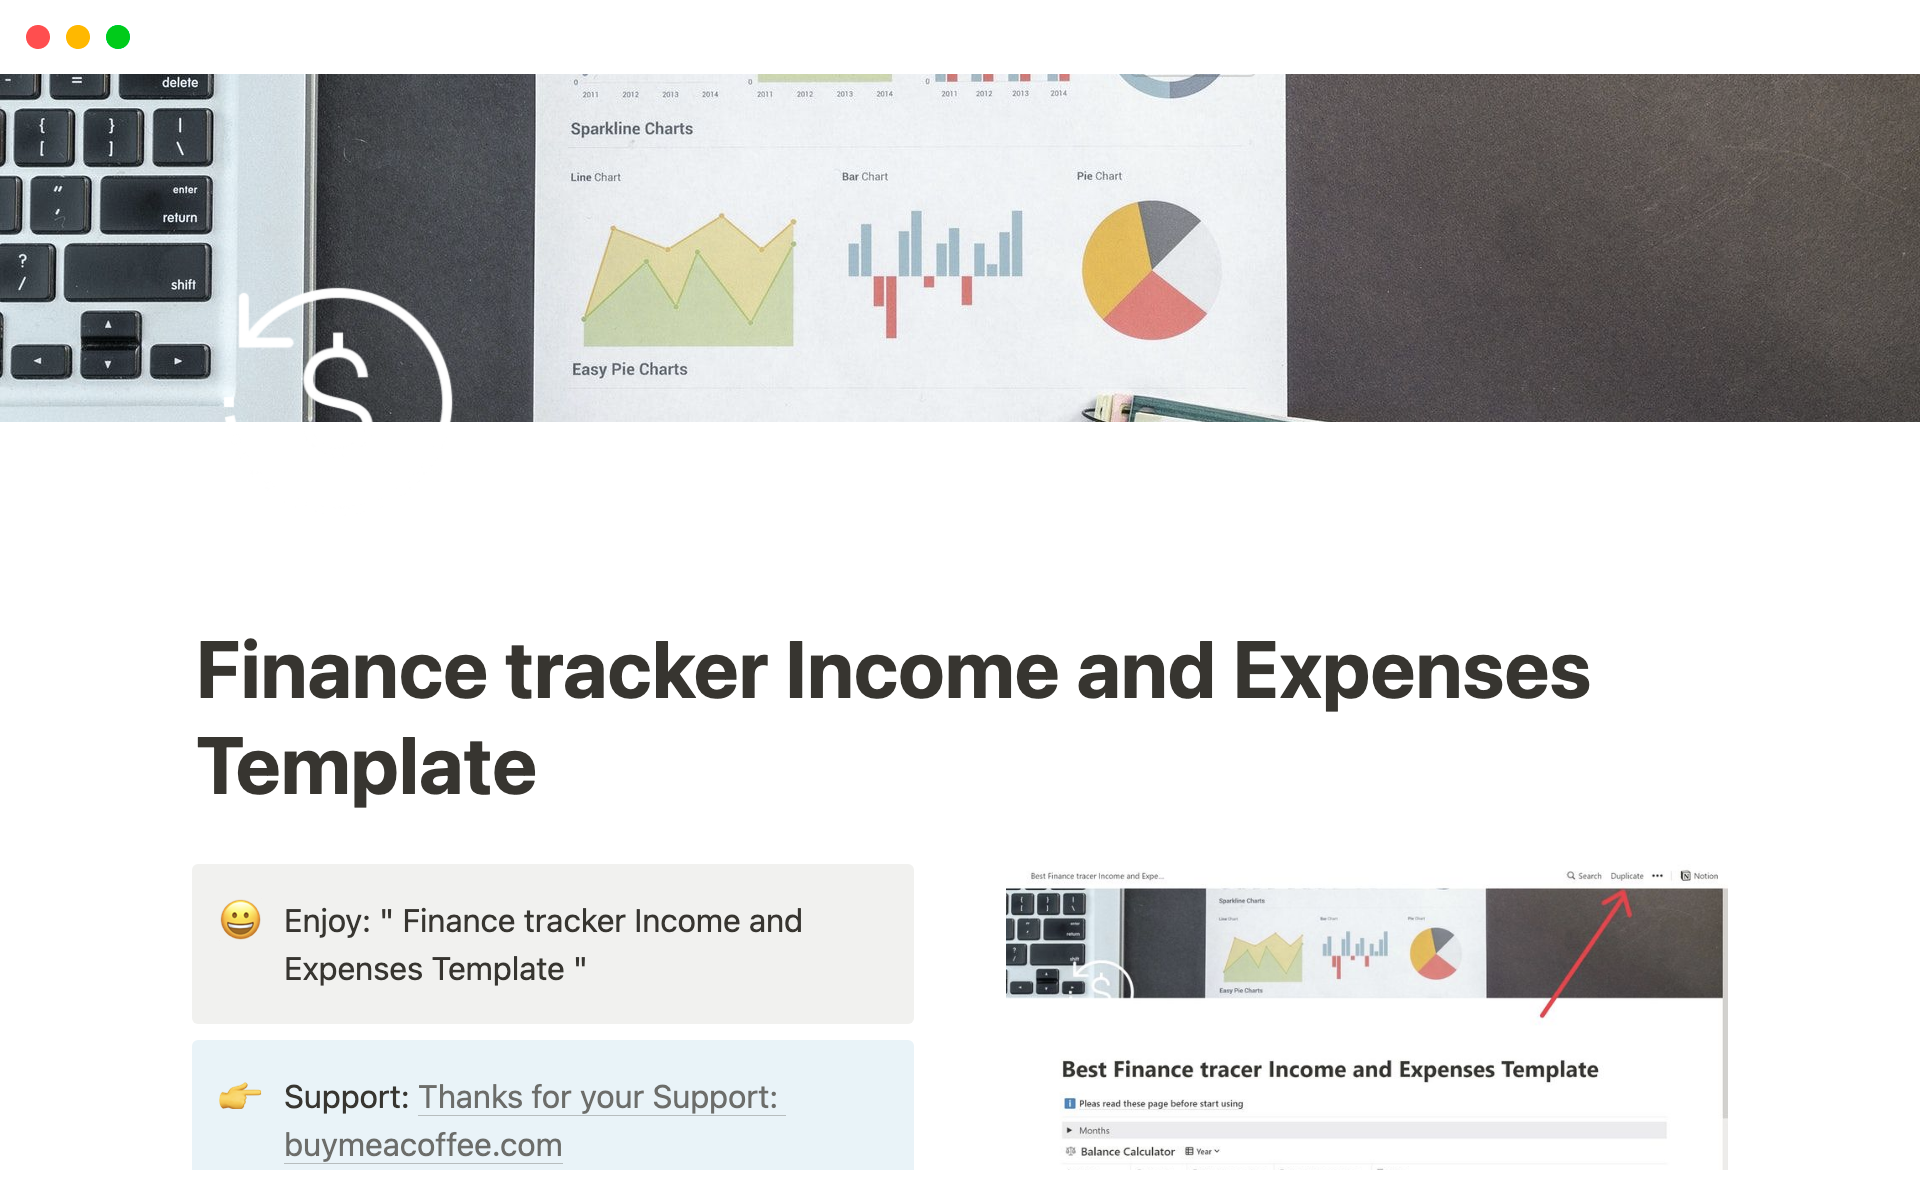 Finance tracker Income and Expenses Templateのテンプレートのプレビュー